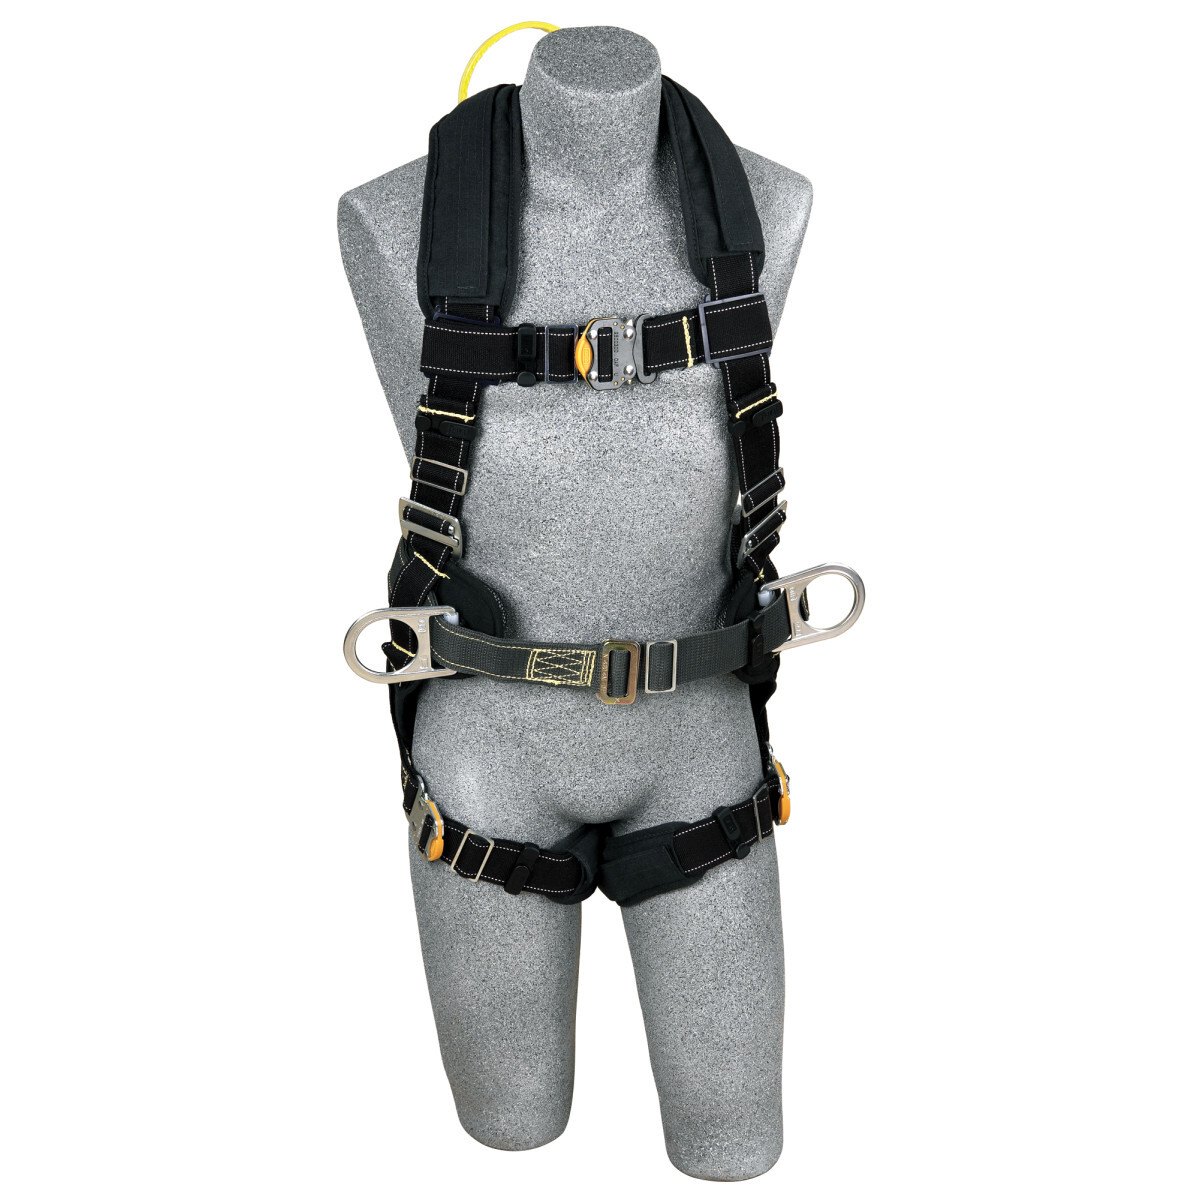 3M™ DBI-SALA® Large ExoFit™ XP Arc Flash Flame Resistant Construction Style Harness With Side D-Ring, Quick Connect Buckle Leg S